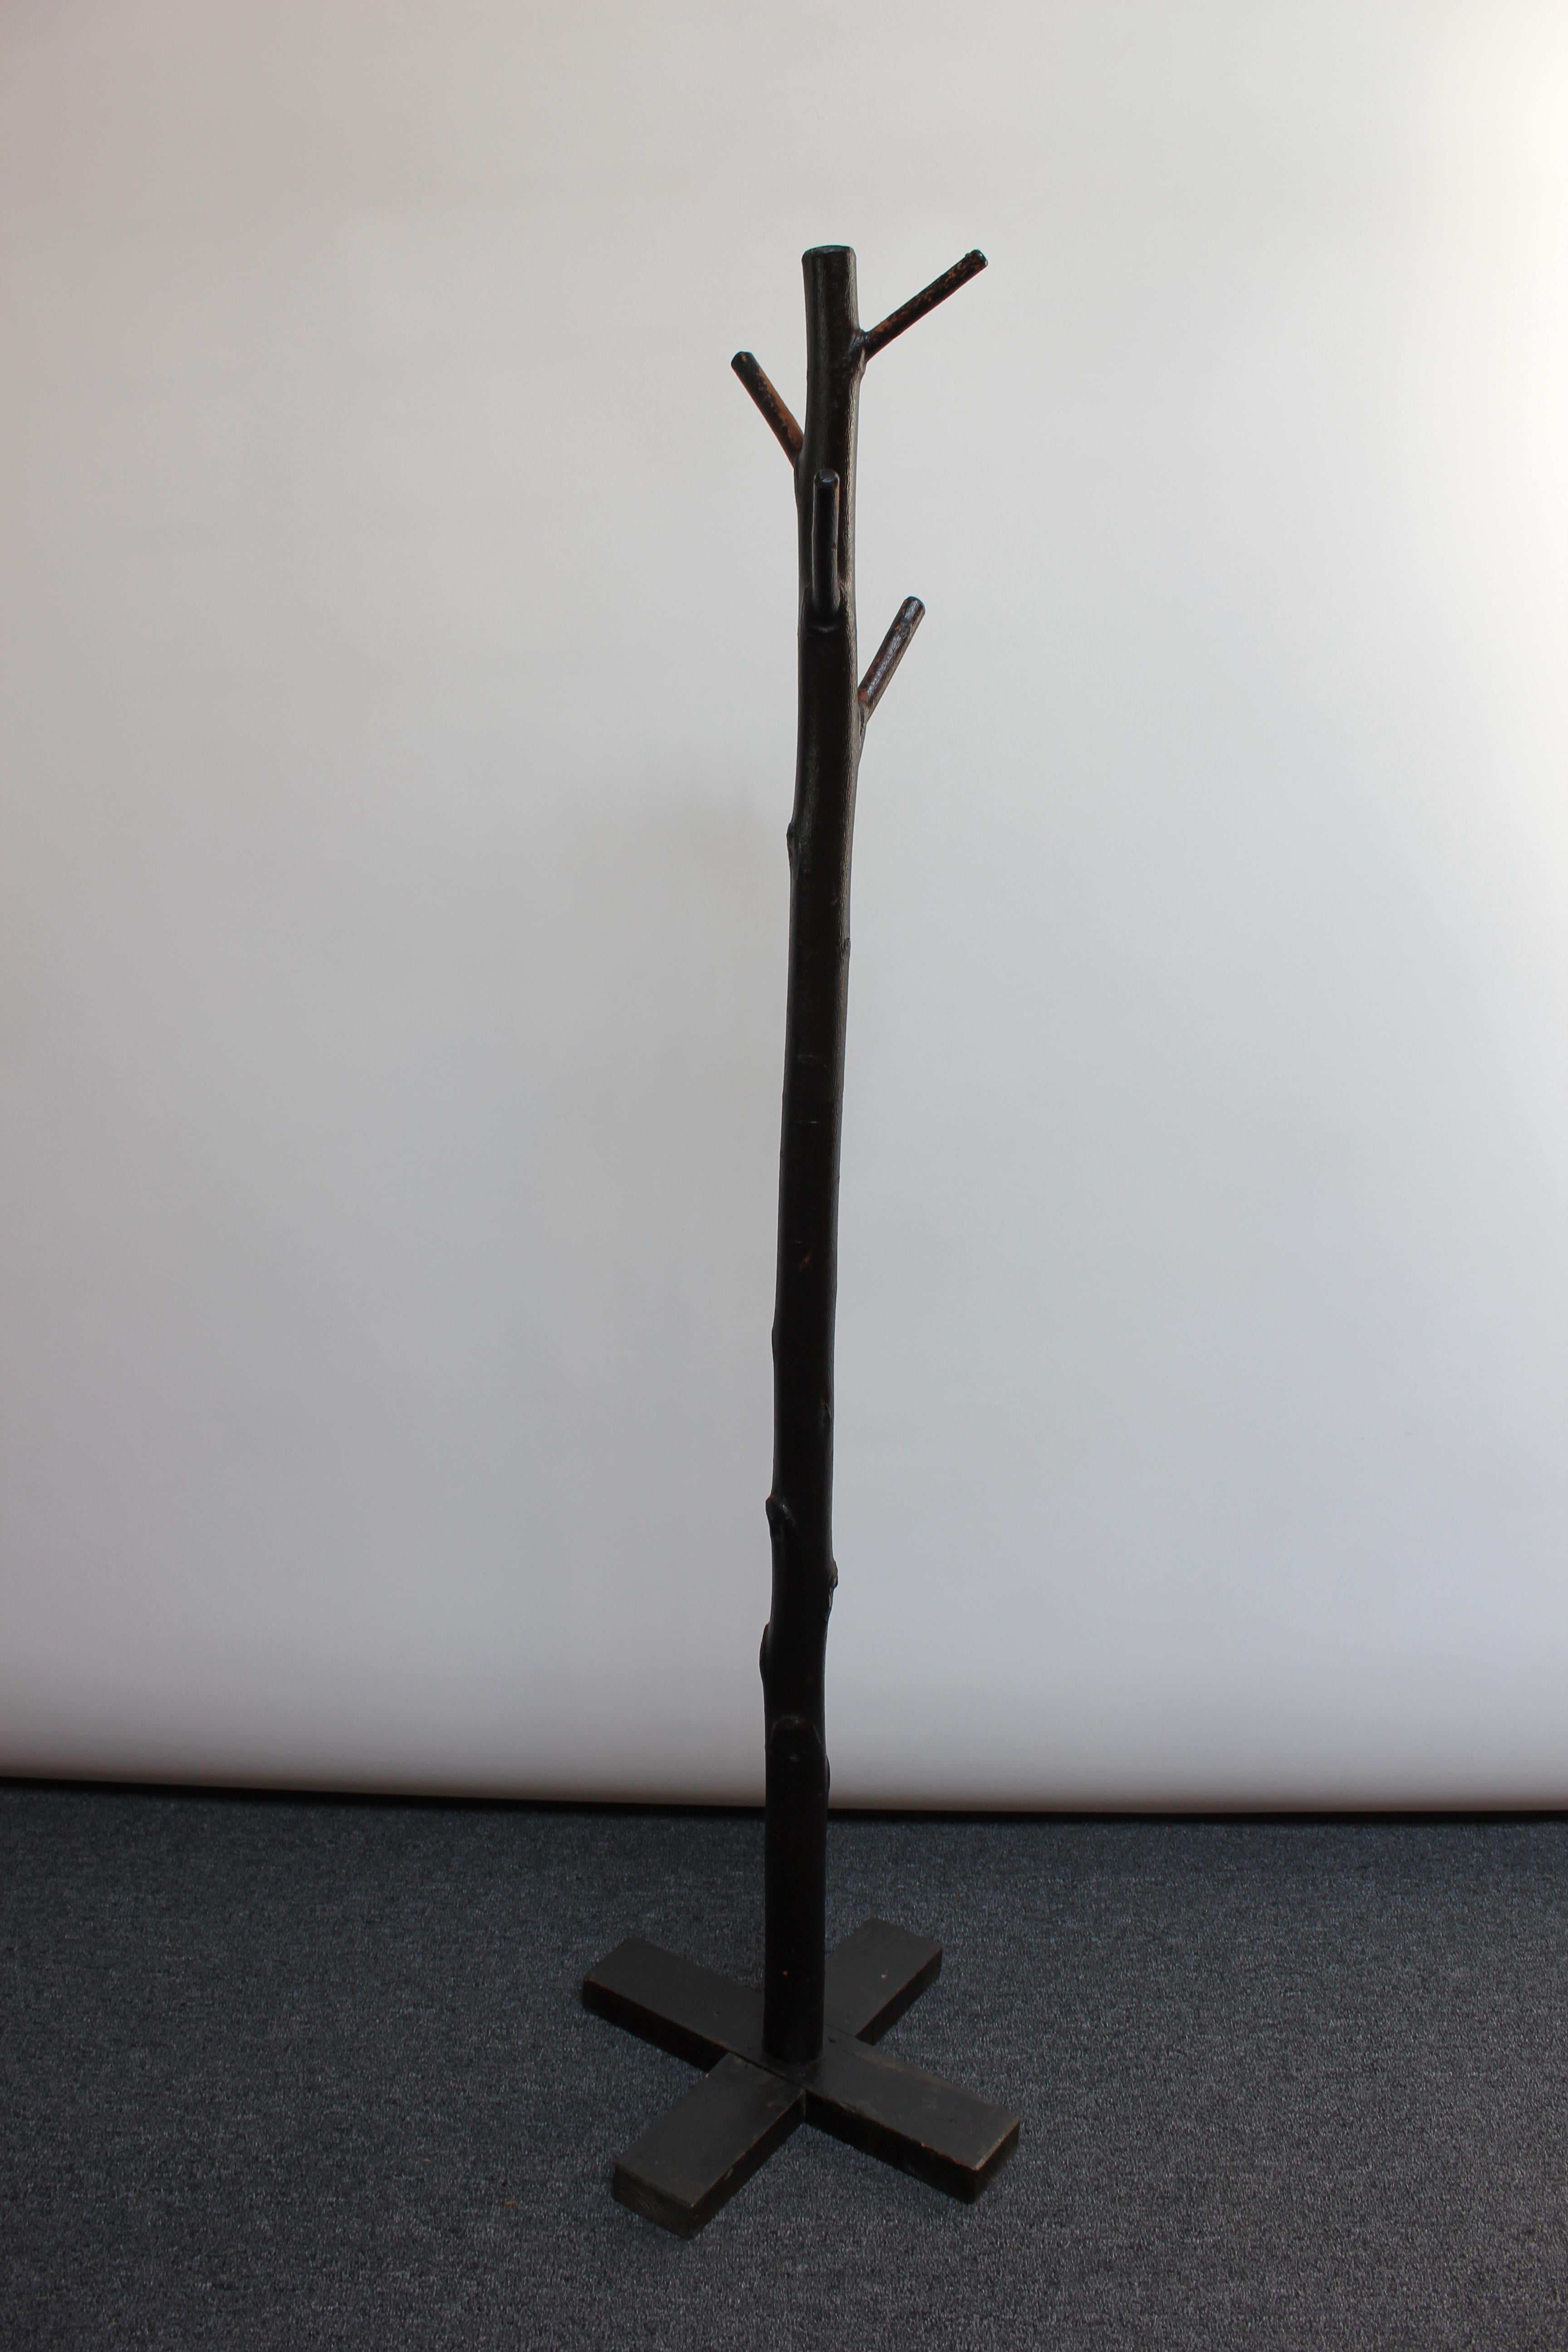 Impressive tree-form coat / hat rack, circa 1920s, composed of ebonized dry wood of an actual tree (likely cherry). Fitted to a carved wood base. Rich ebony color and marvelous texture with early hand hammered nails and spikes.